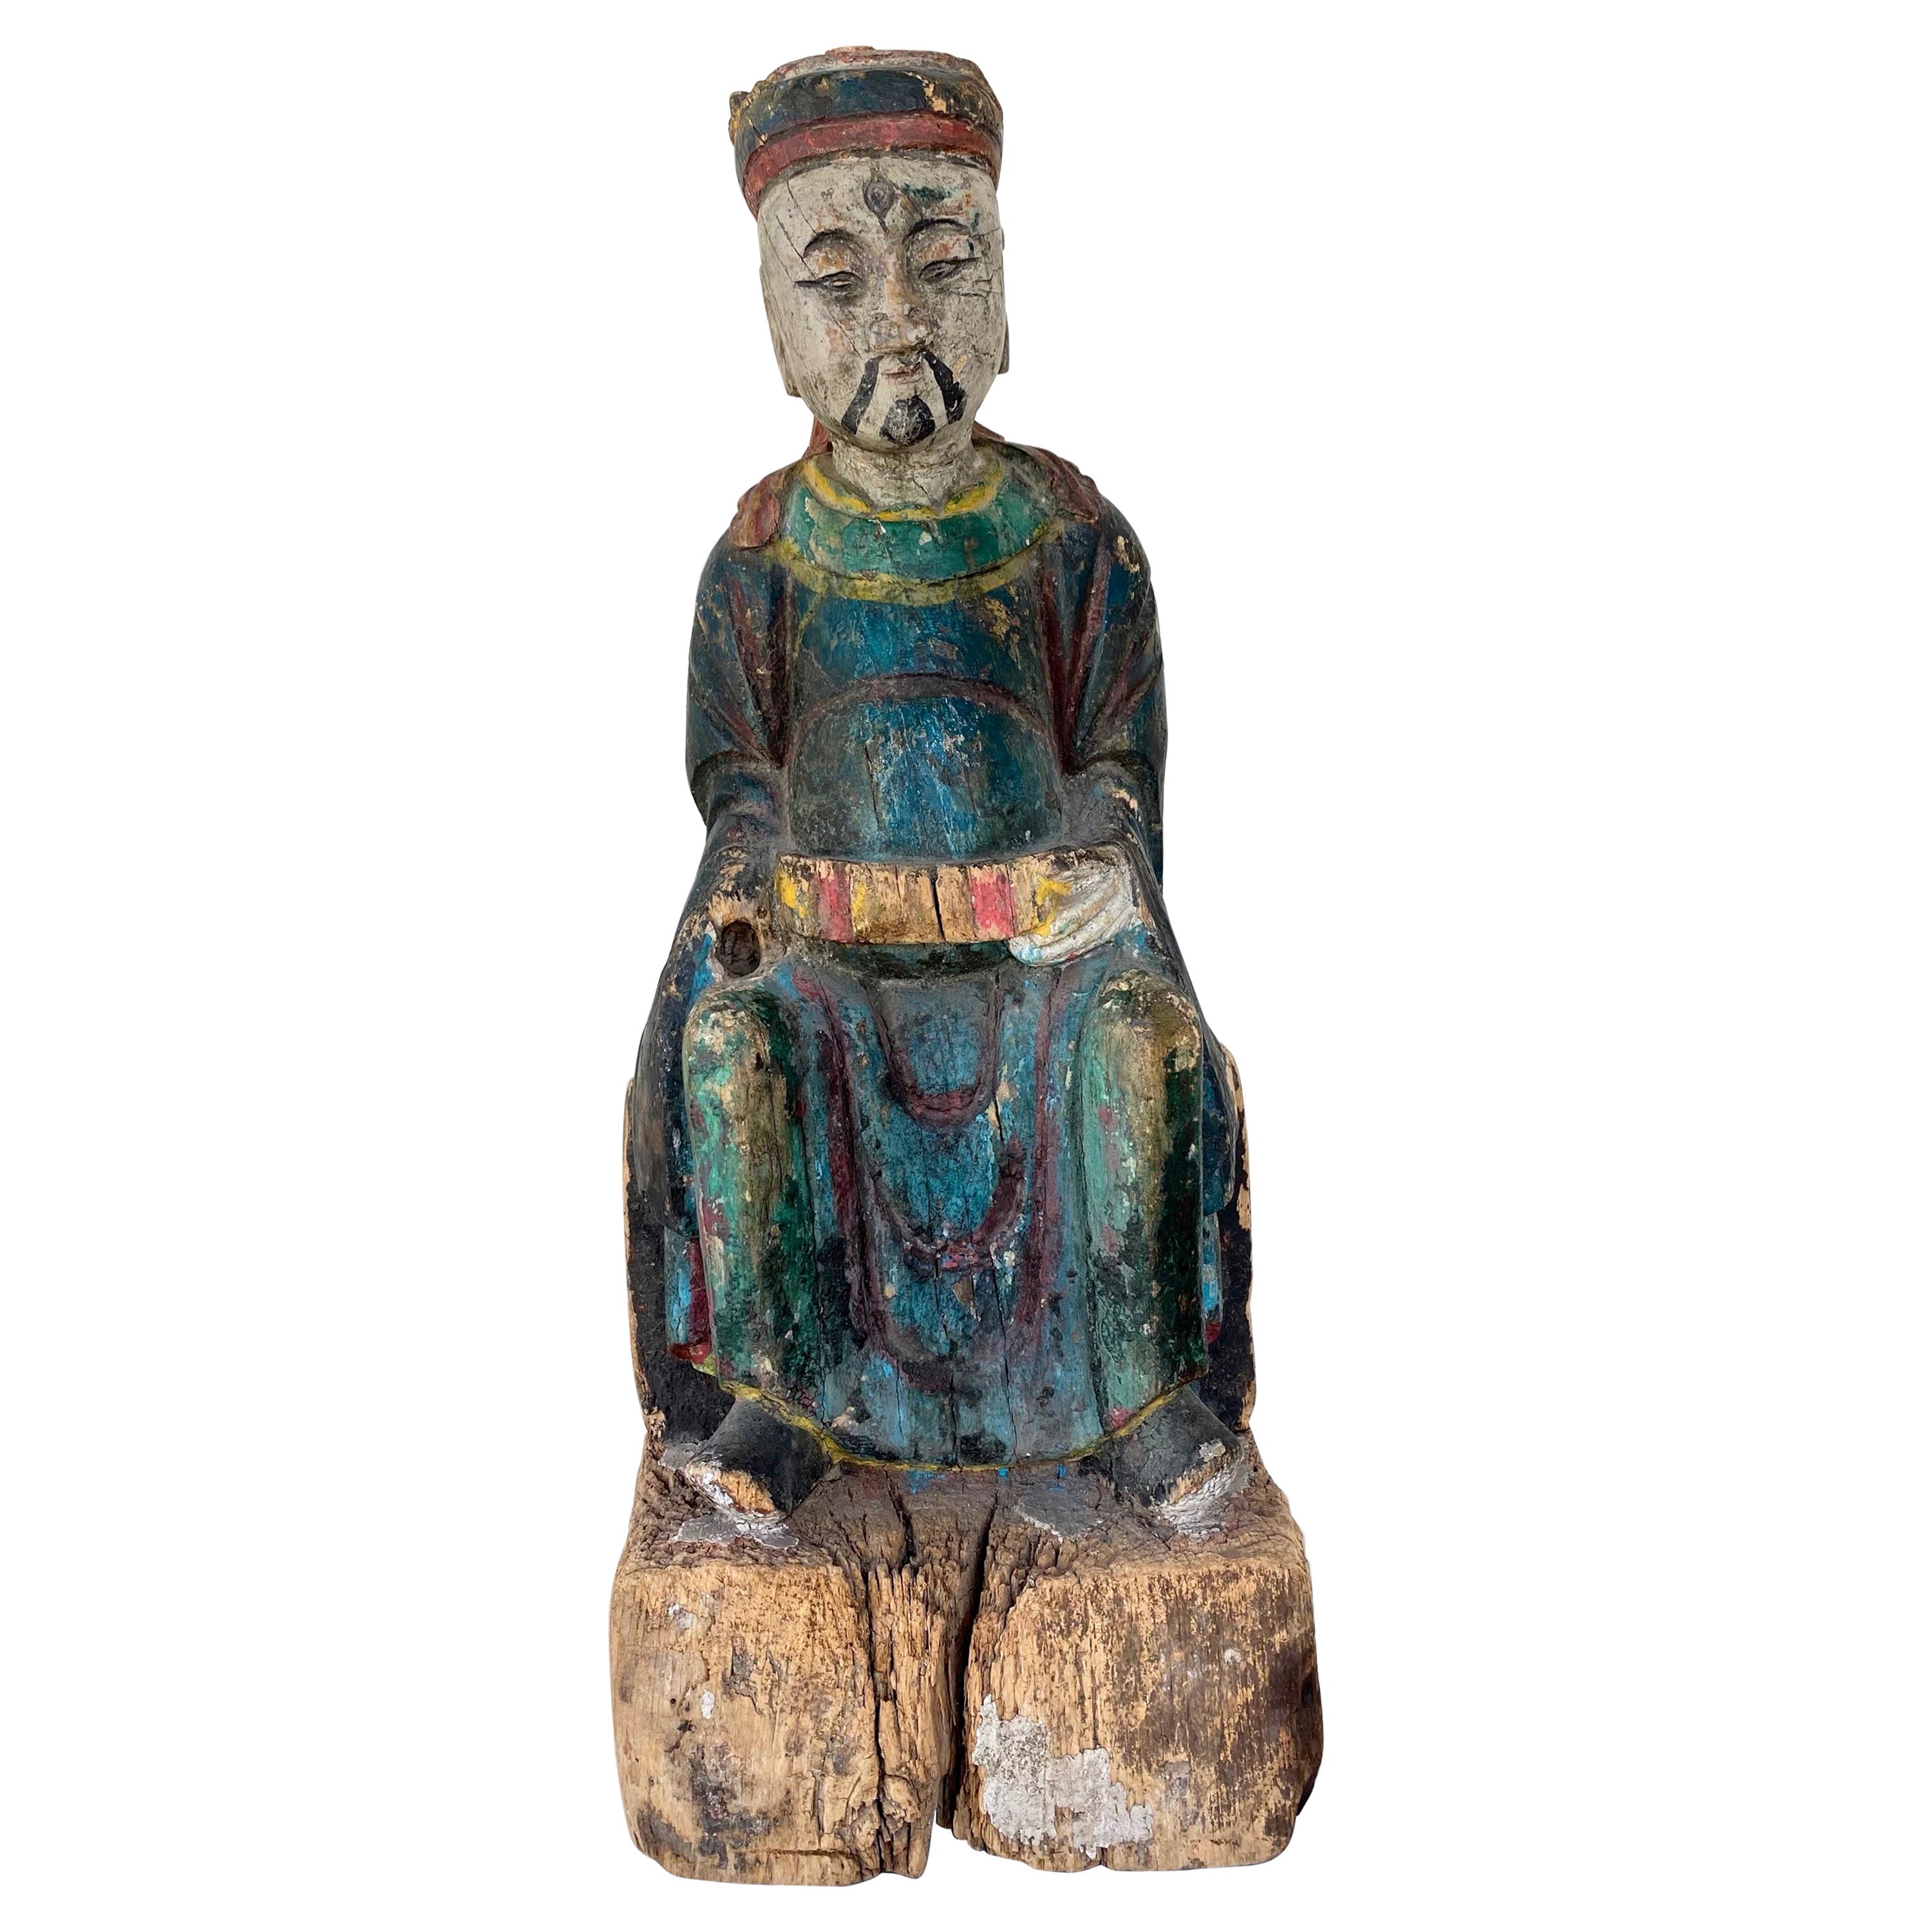 Chinese Qing Dynasty Polychrome Hand-Carved Wooden Sage Statue, c. 1800